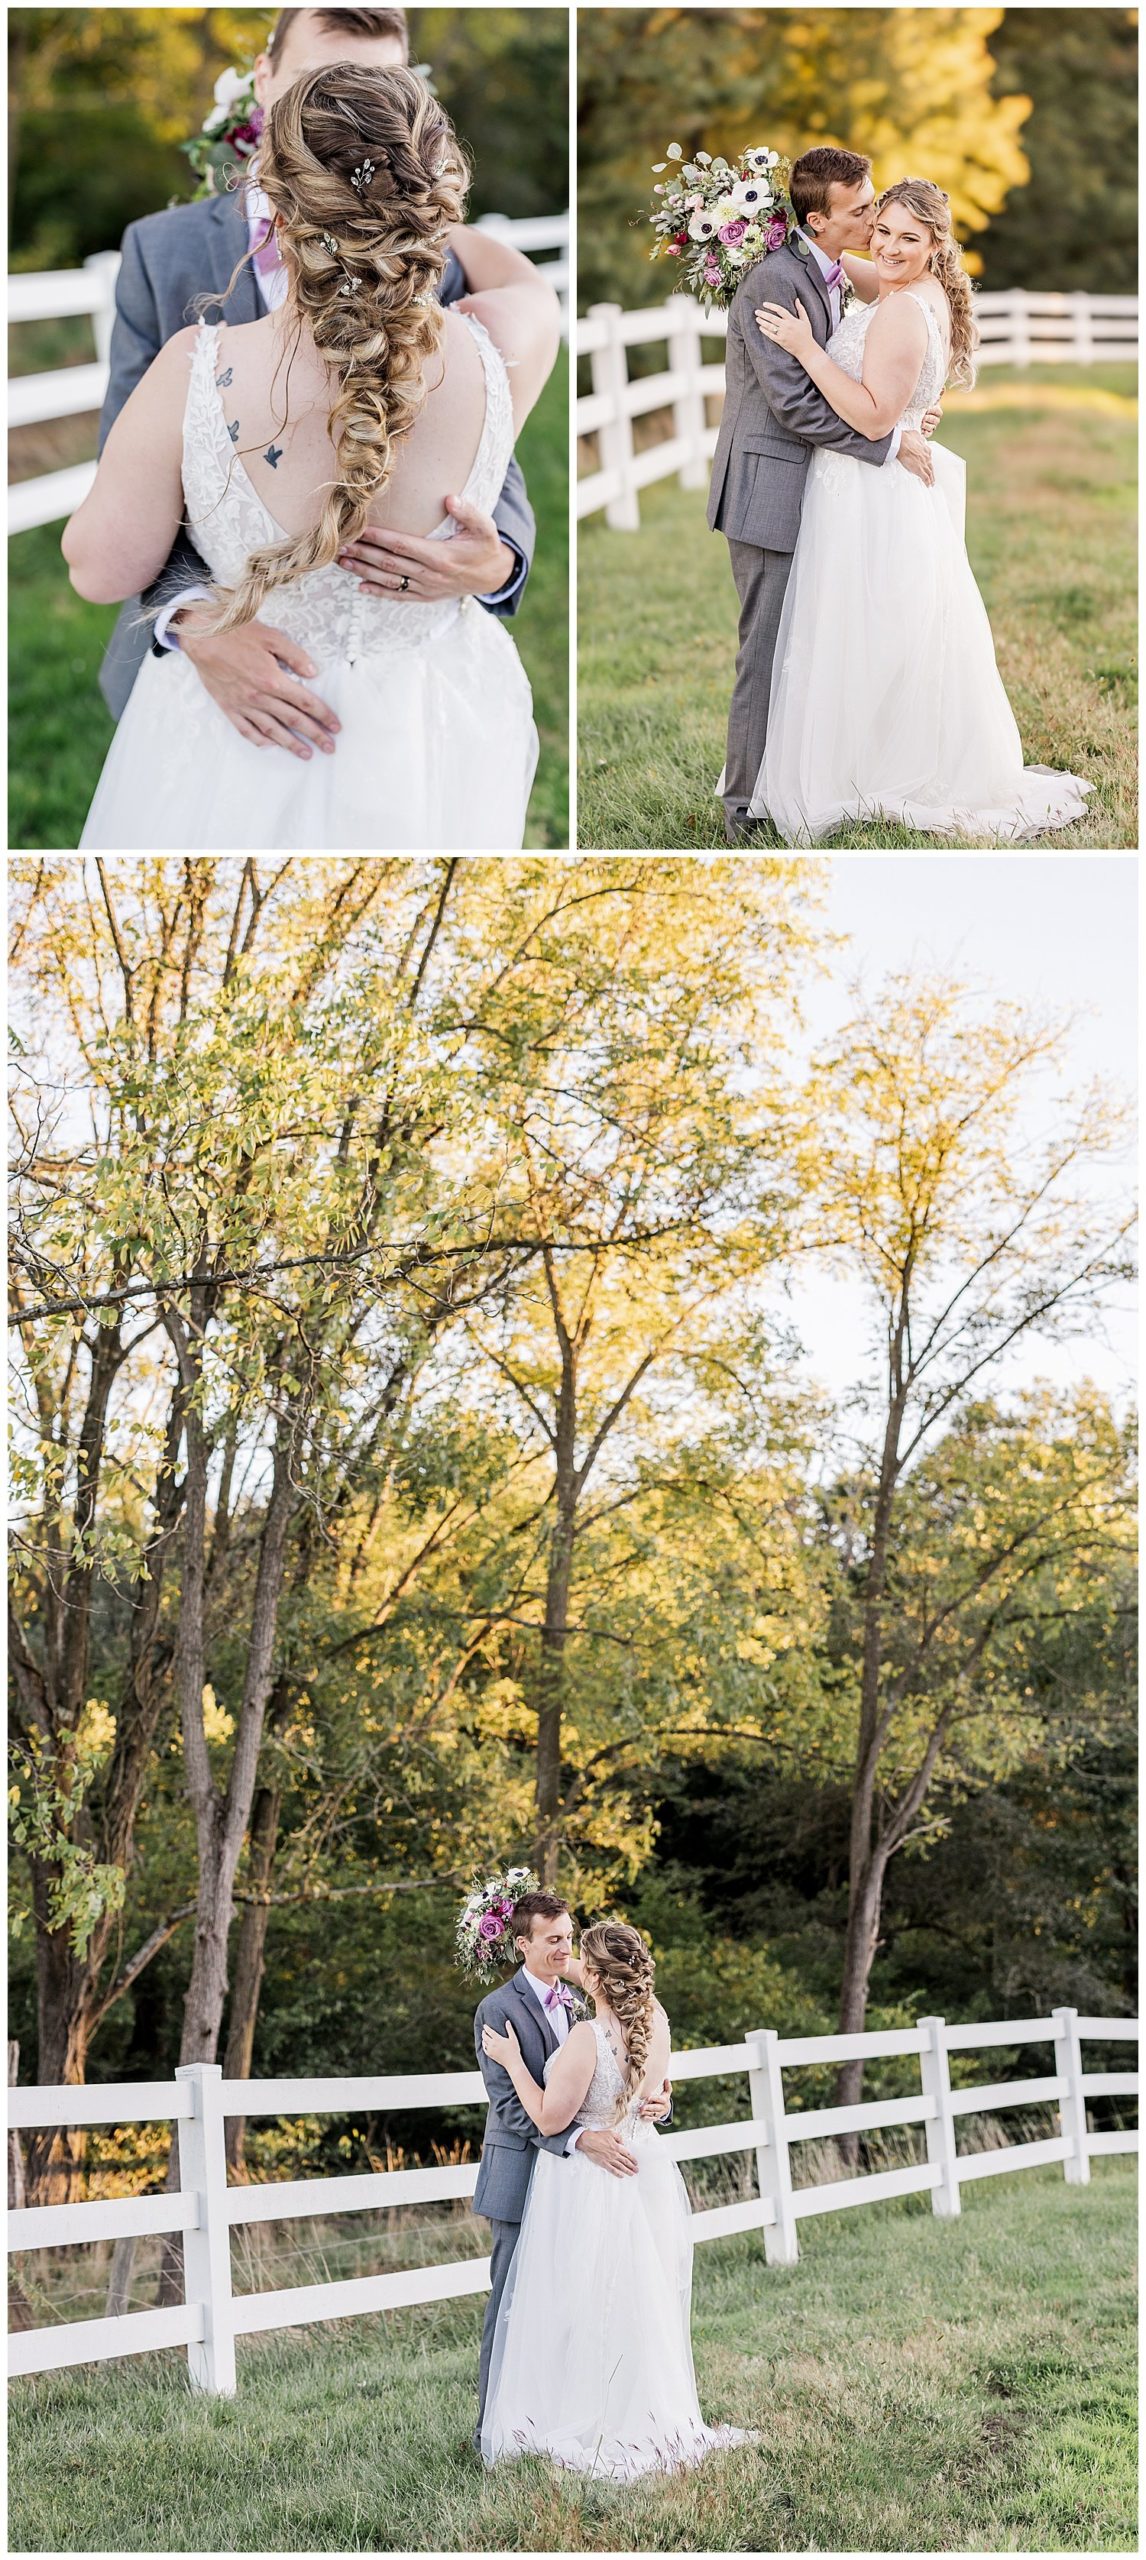 Therese Dan Married Pond View Farm Wedding Living Radiant Photography Blog_0054.jpg